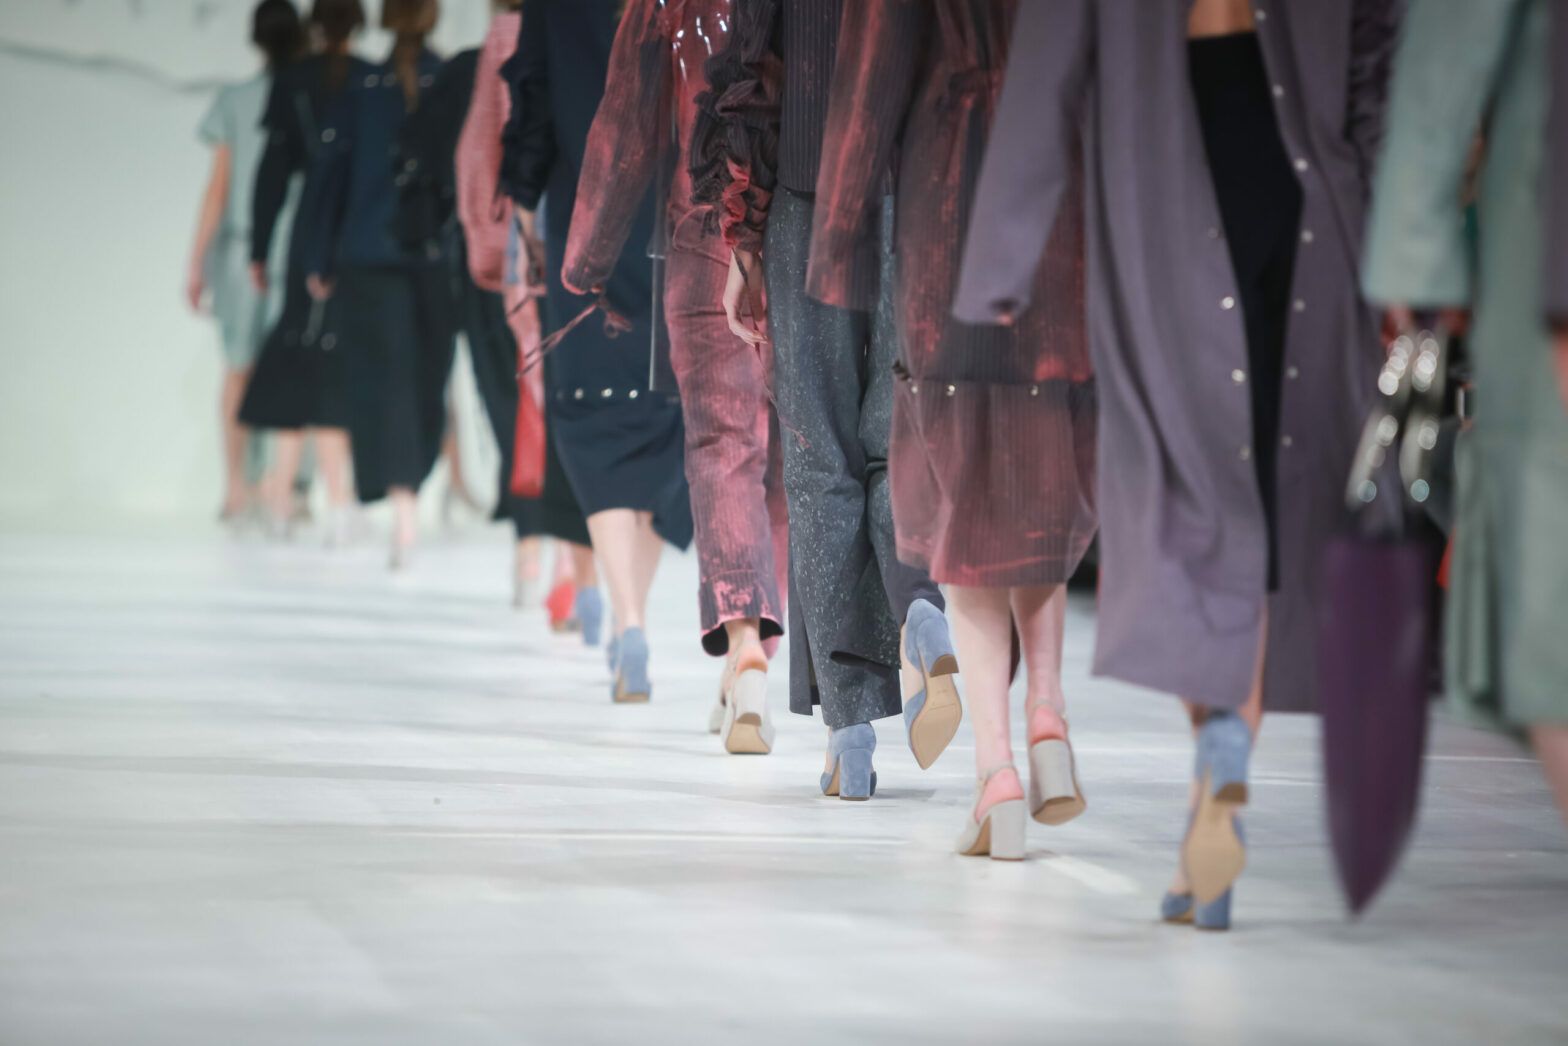 Catwalk worthy: Trying to improve the fashion life cycle